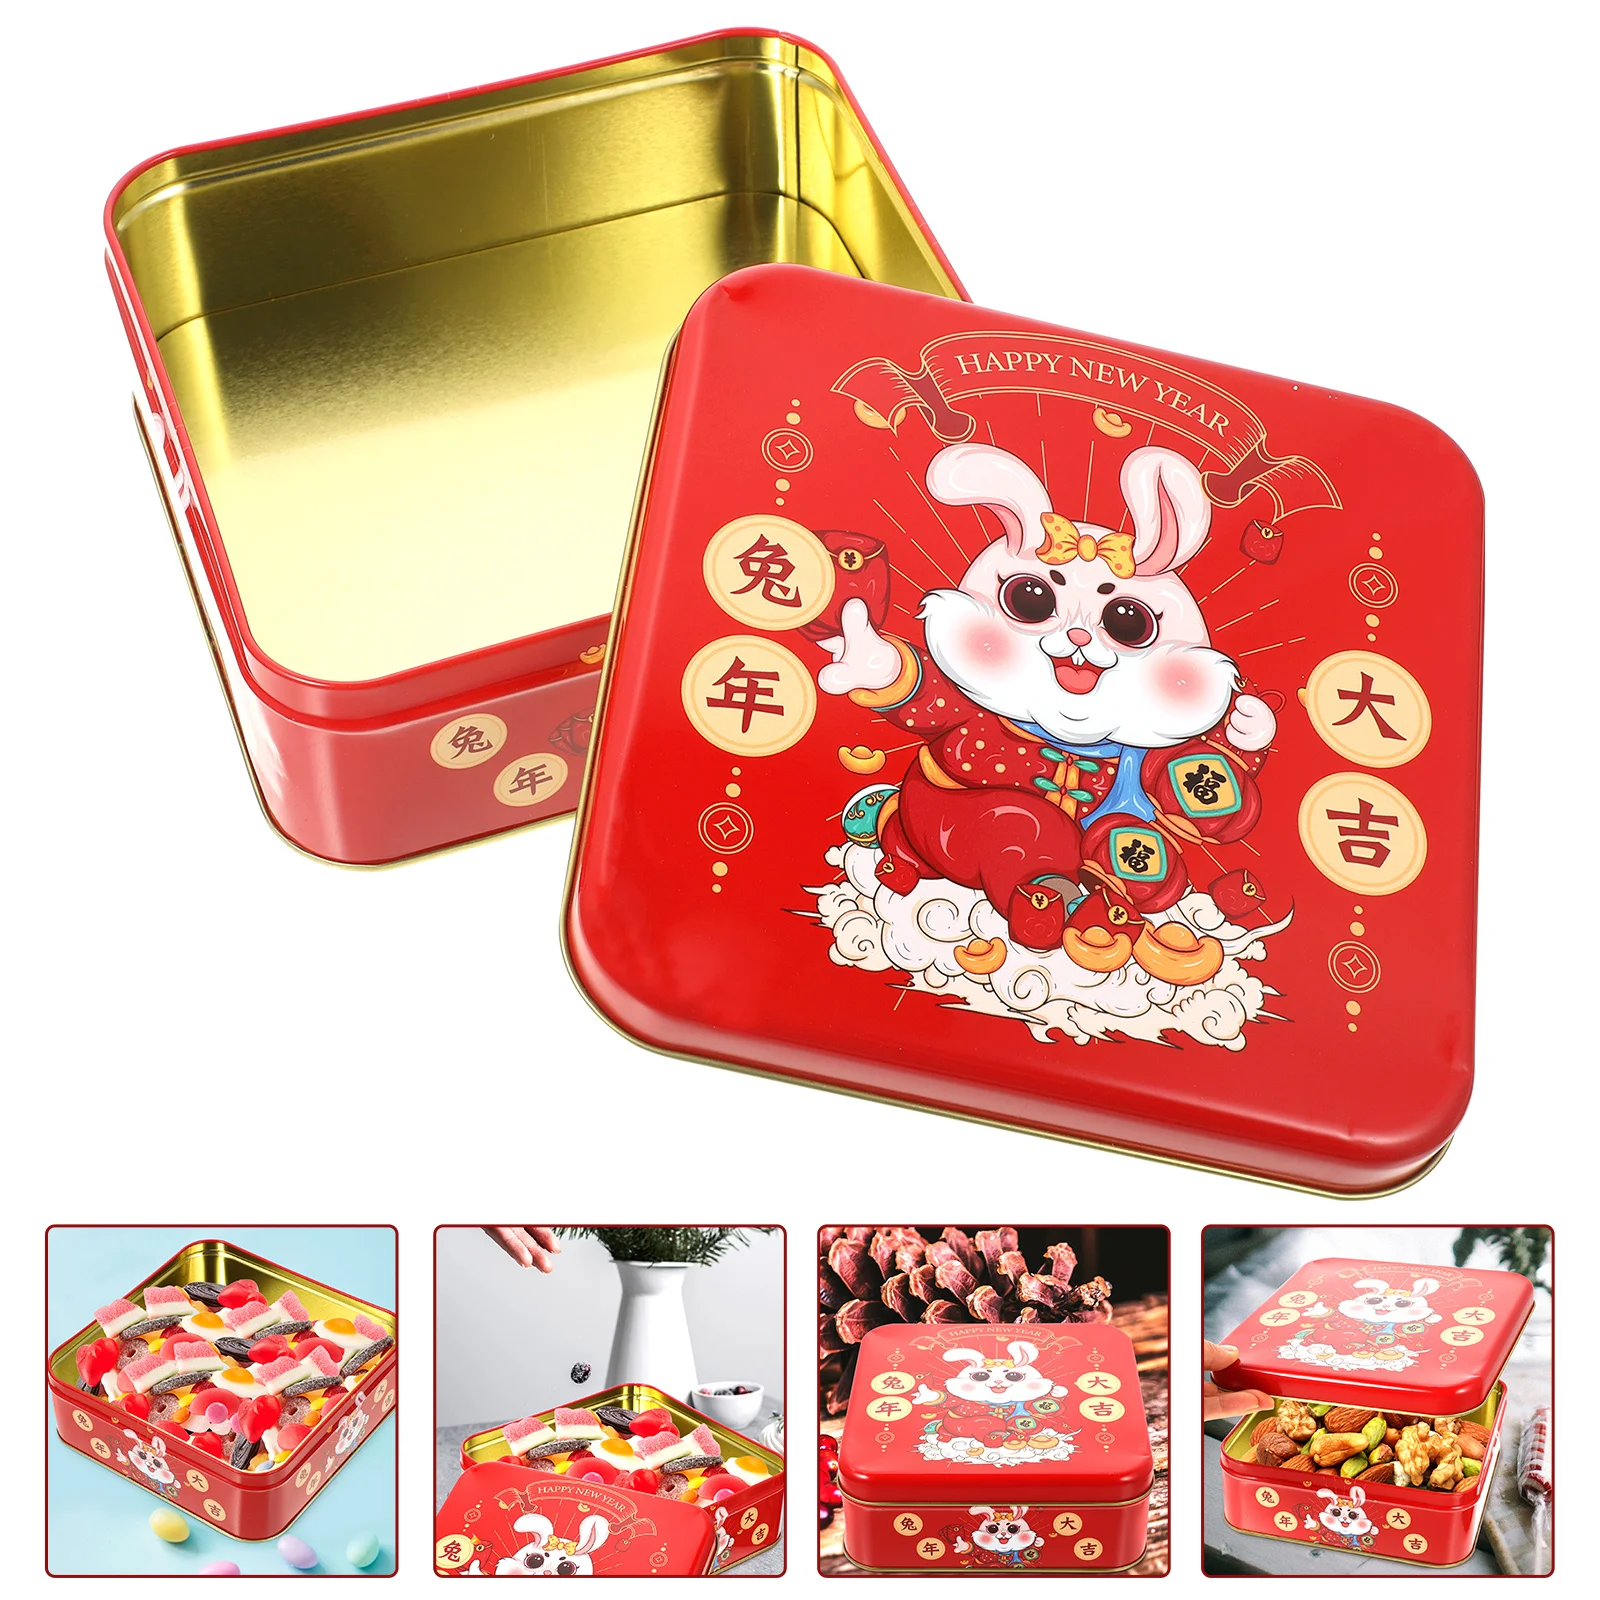 

Box Cookie Tins Tin Candy Tinplate Year New Gift Favor Container Metalcookieschinese Lids Packing Christmas Tea Square Rabbit